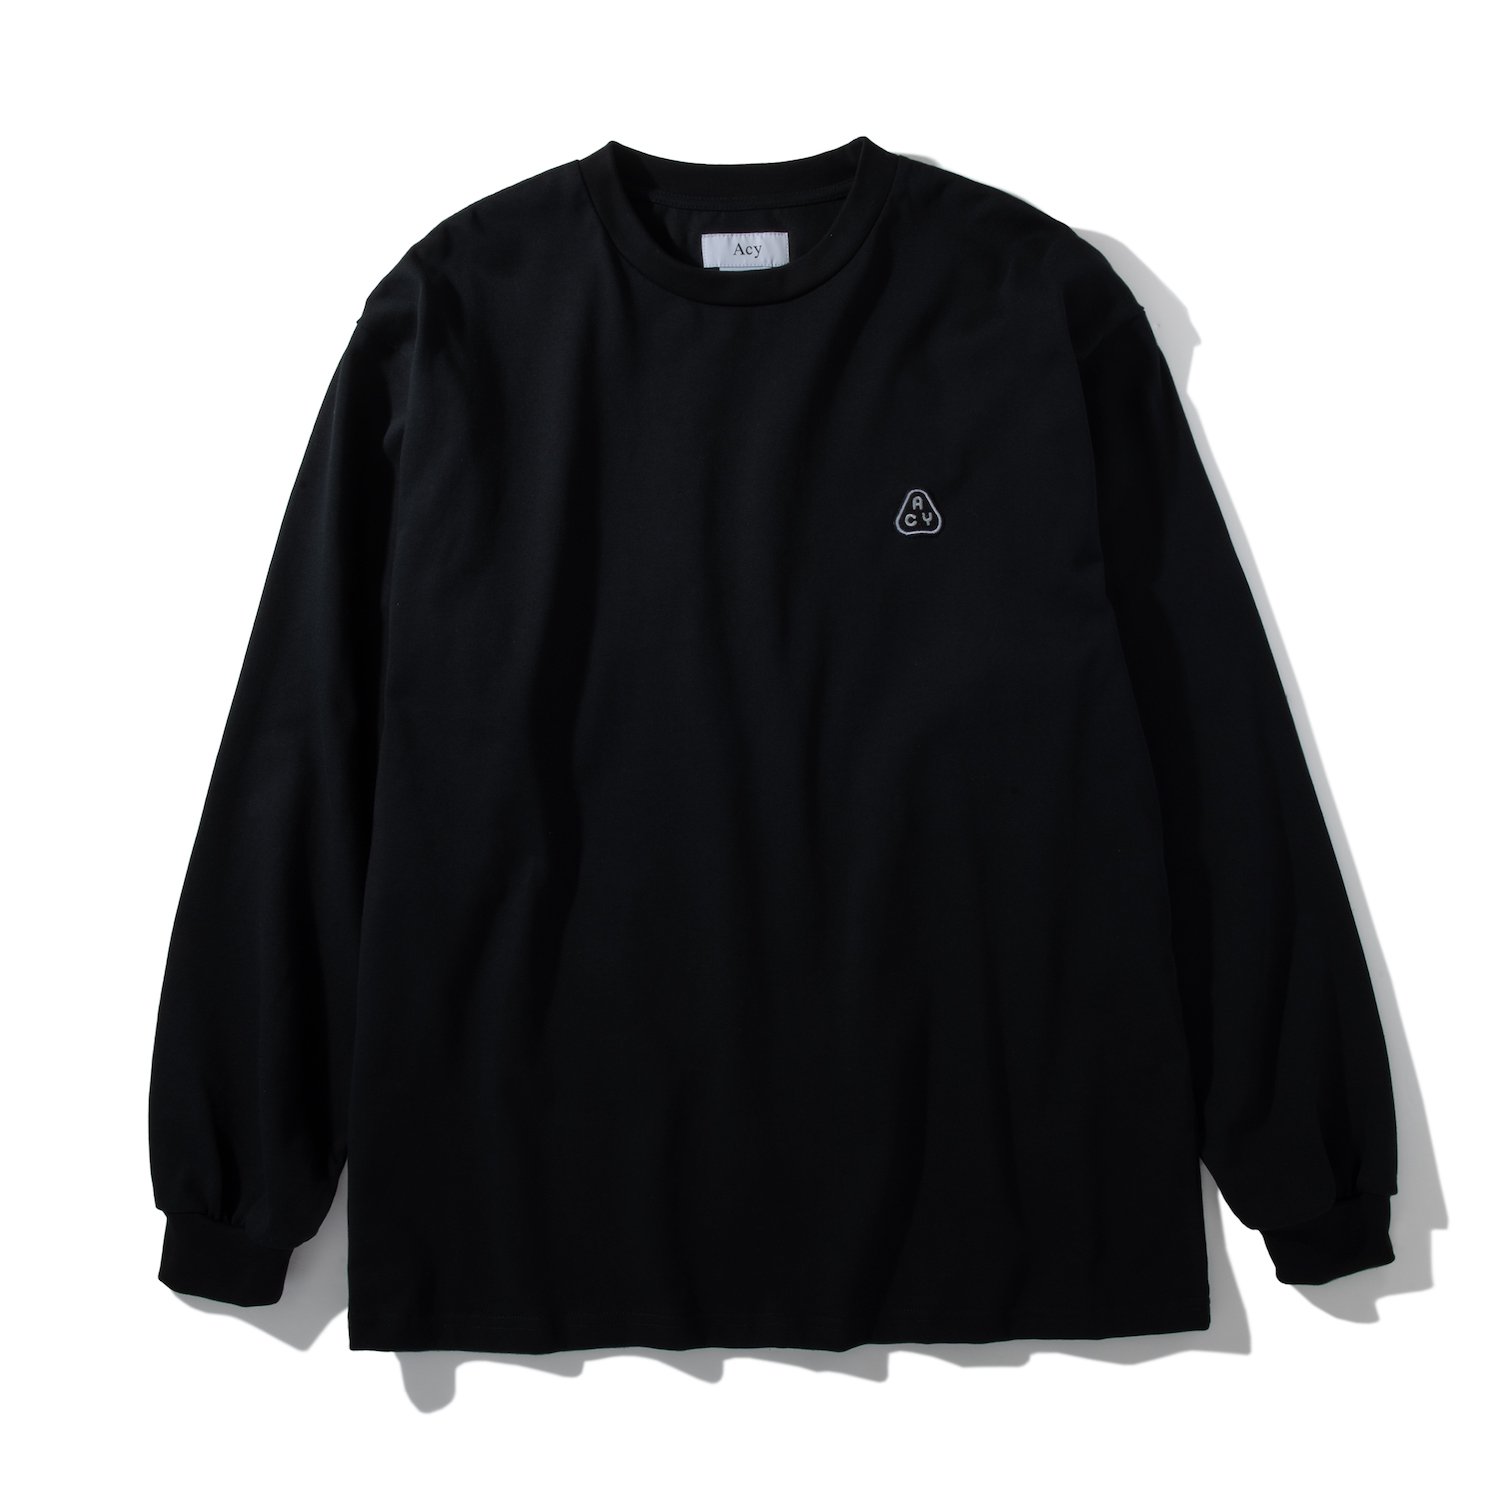 Acy<br>PATCH L/S TEE<br>